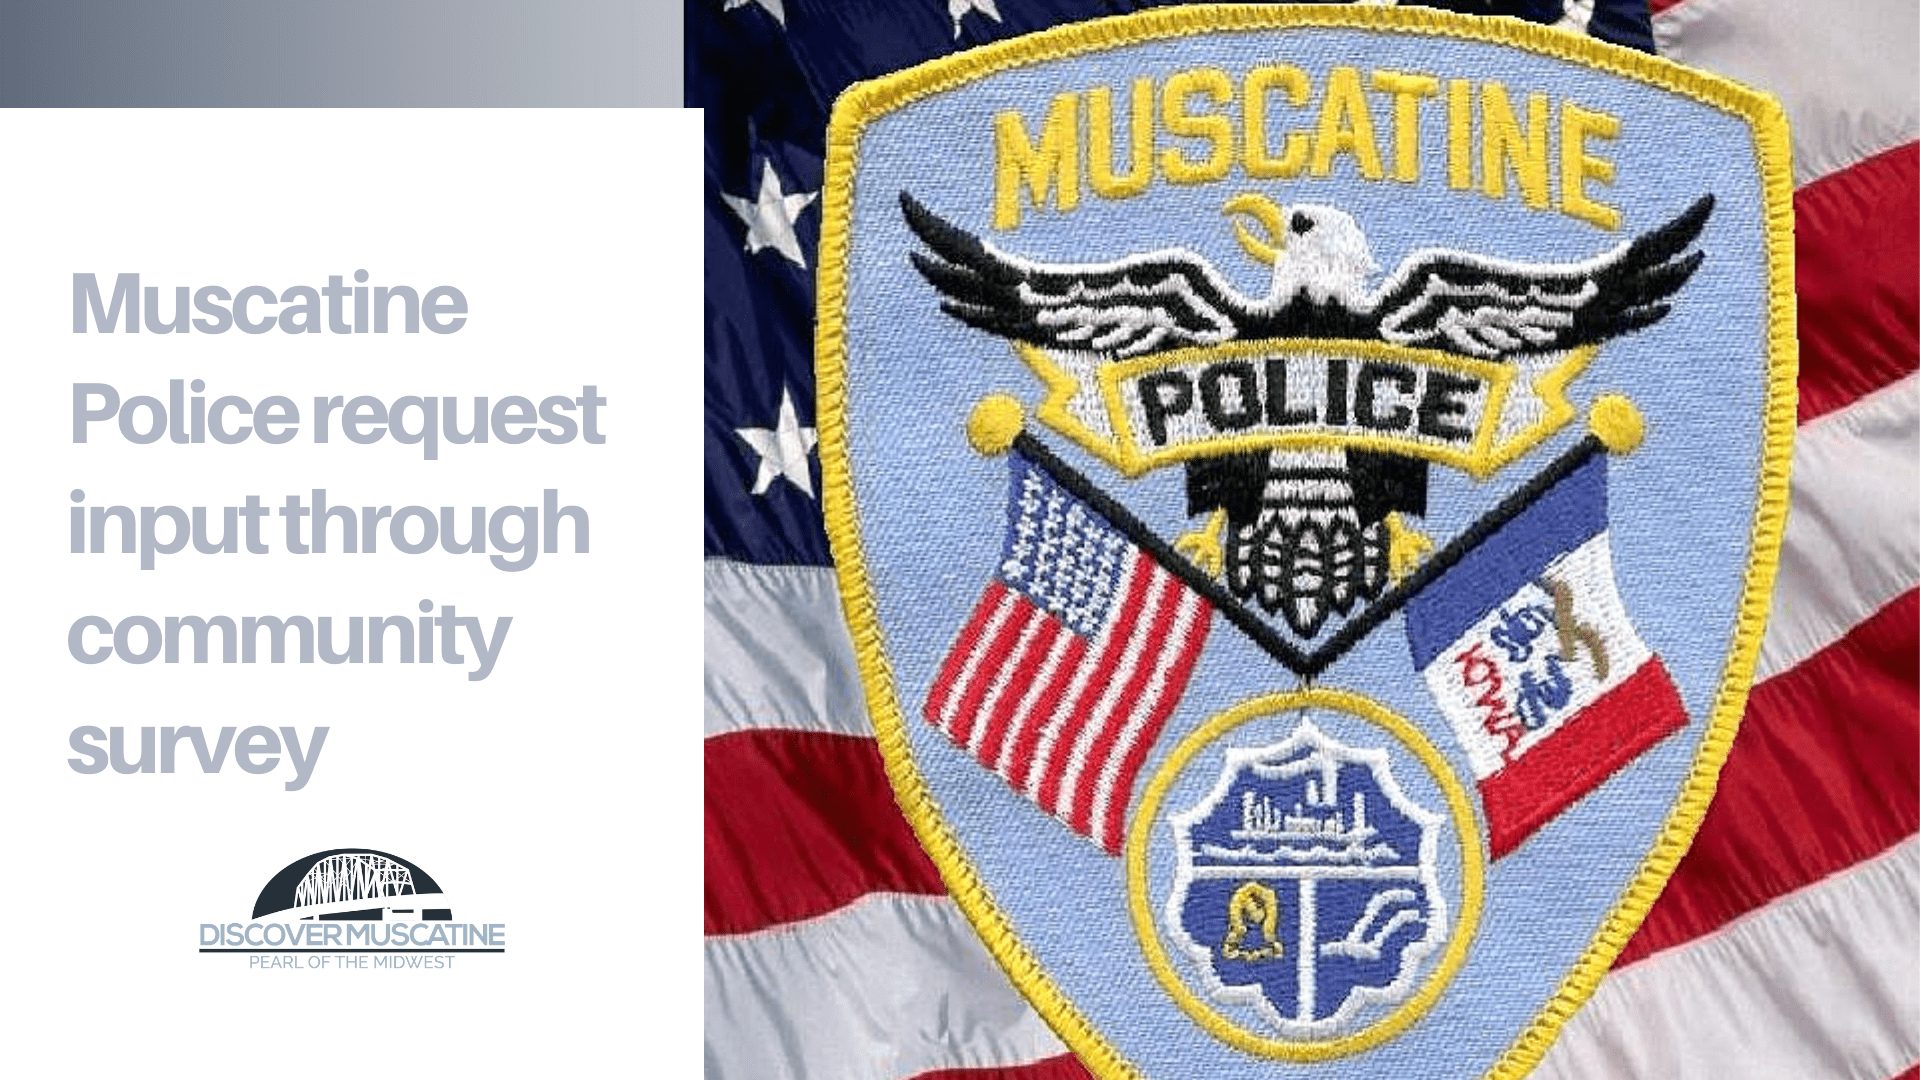 Muscatine Police ask for public input on interaction survey